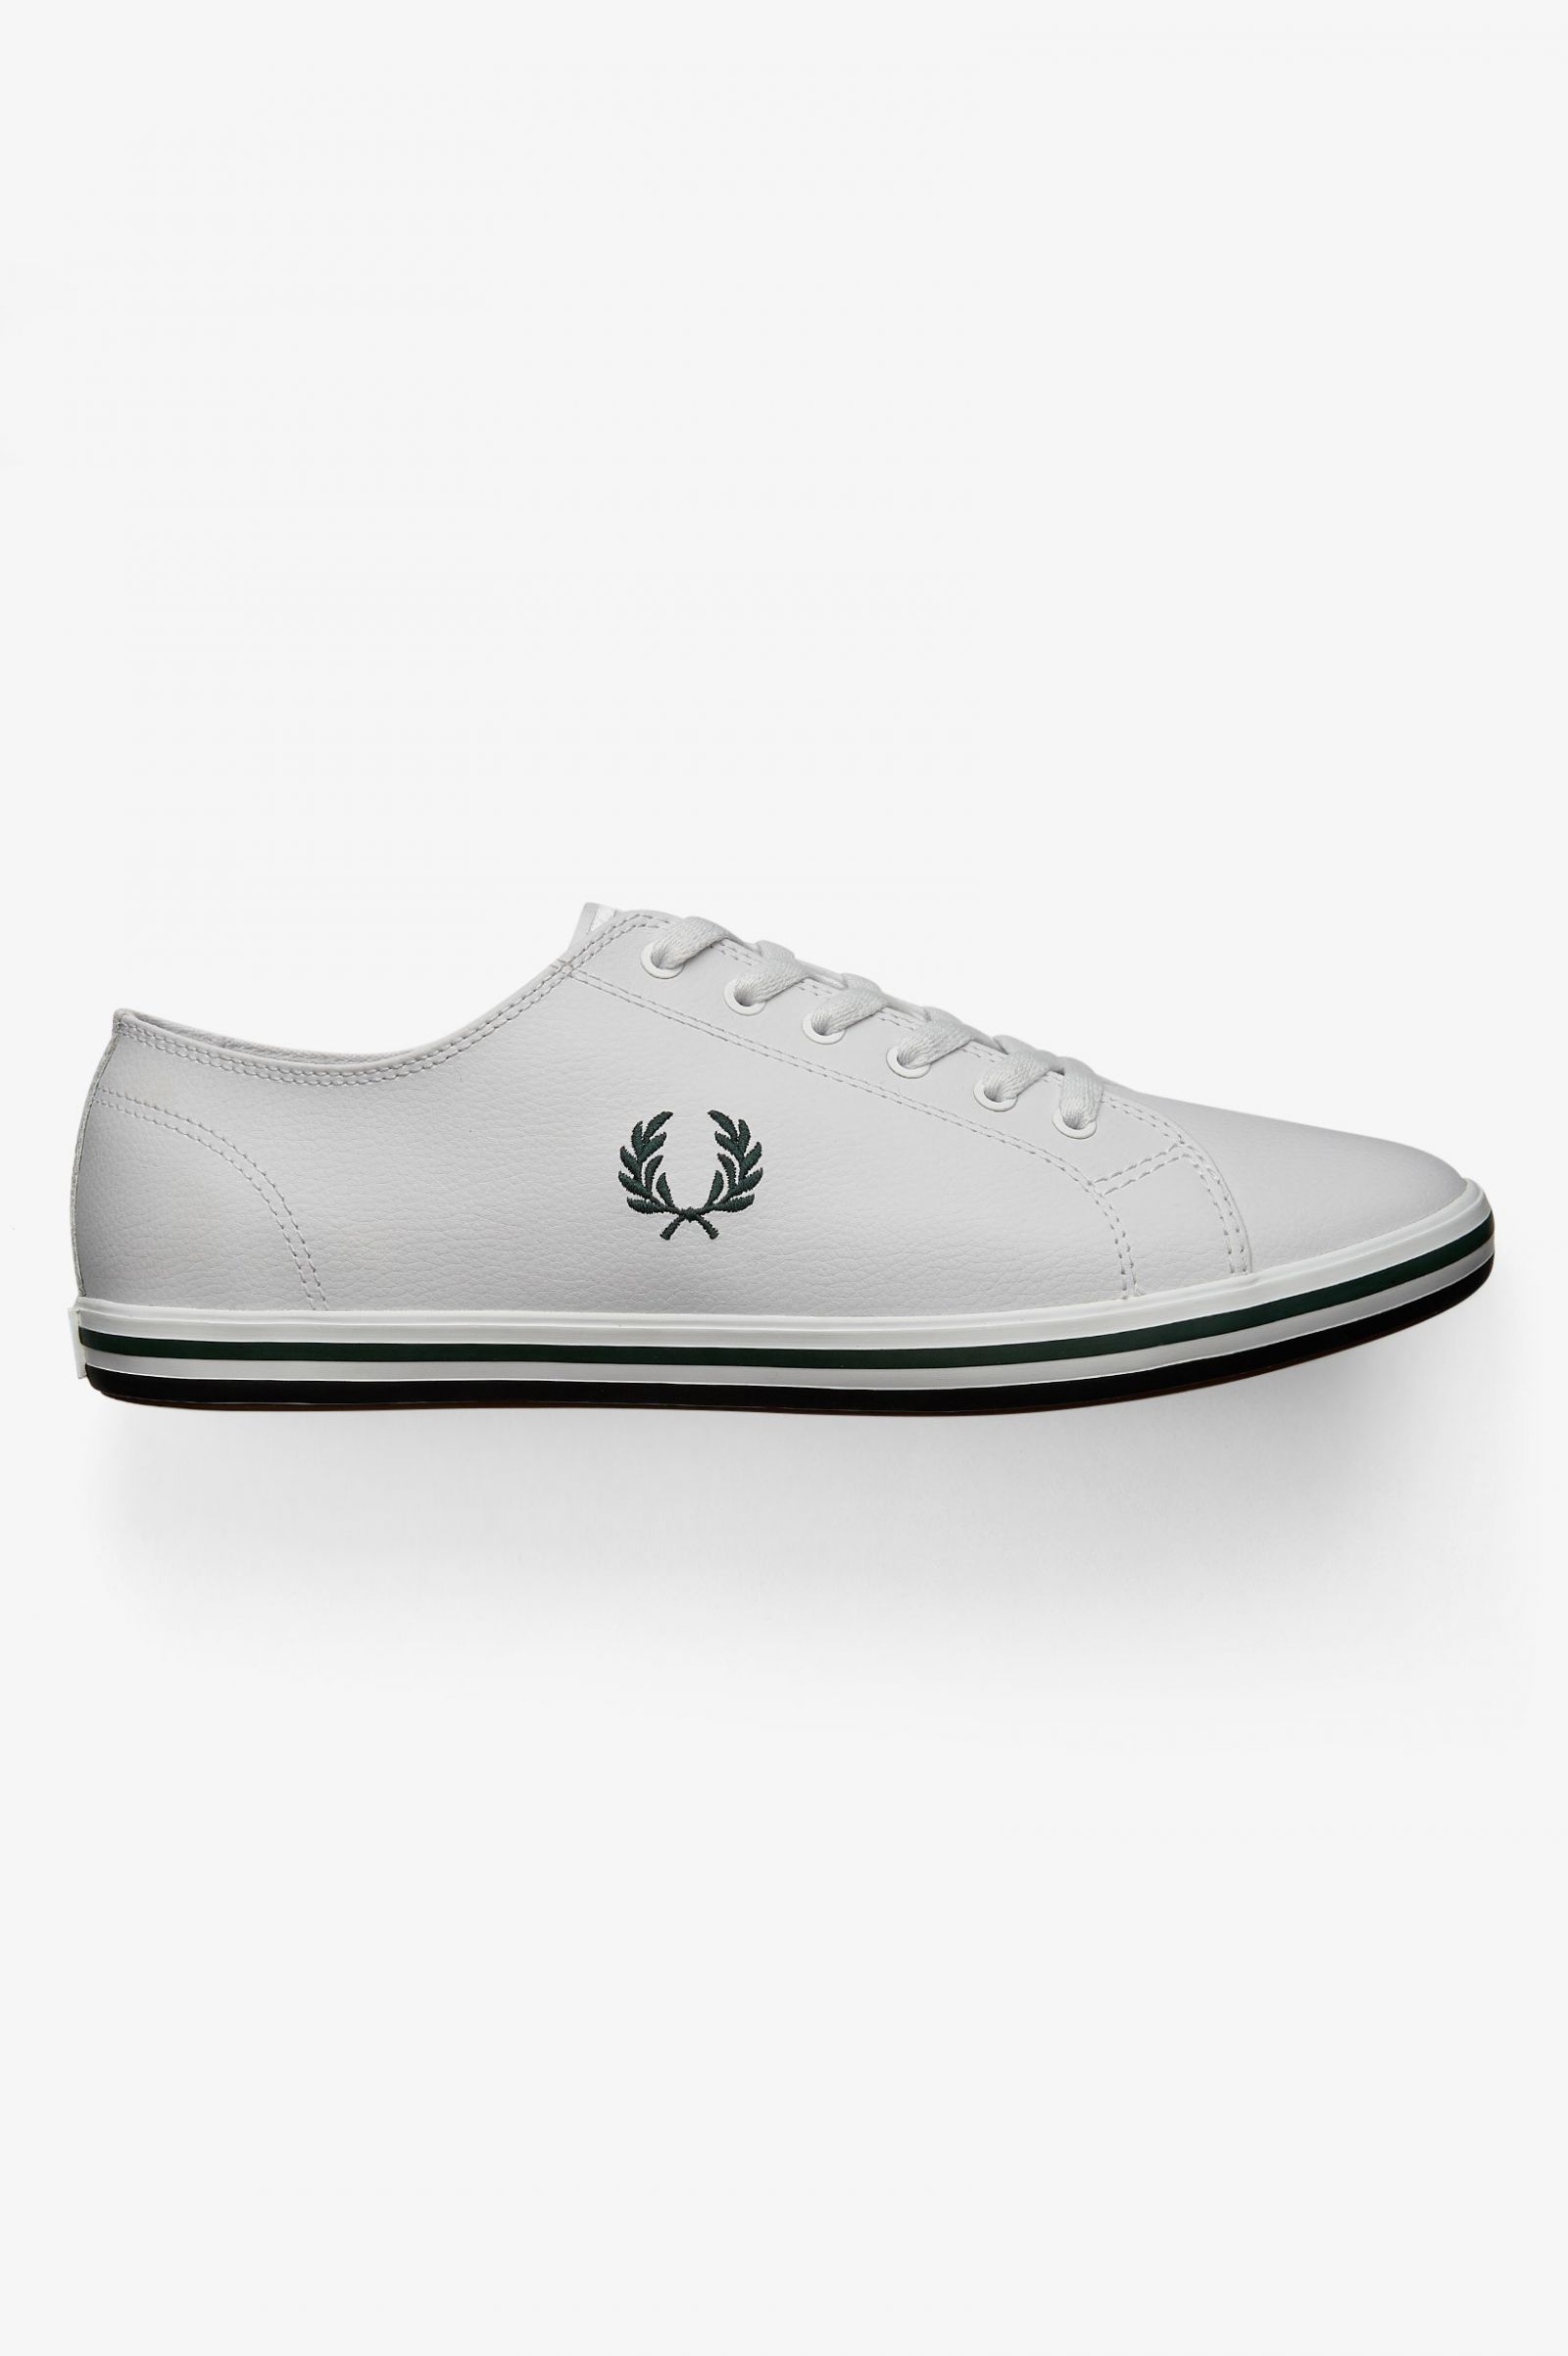 fred perry kingston tan